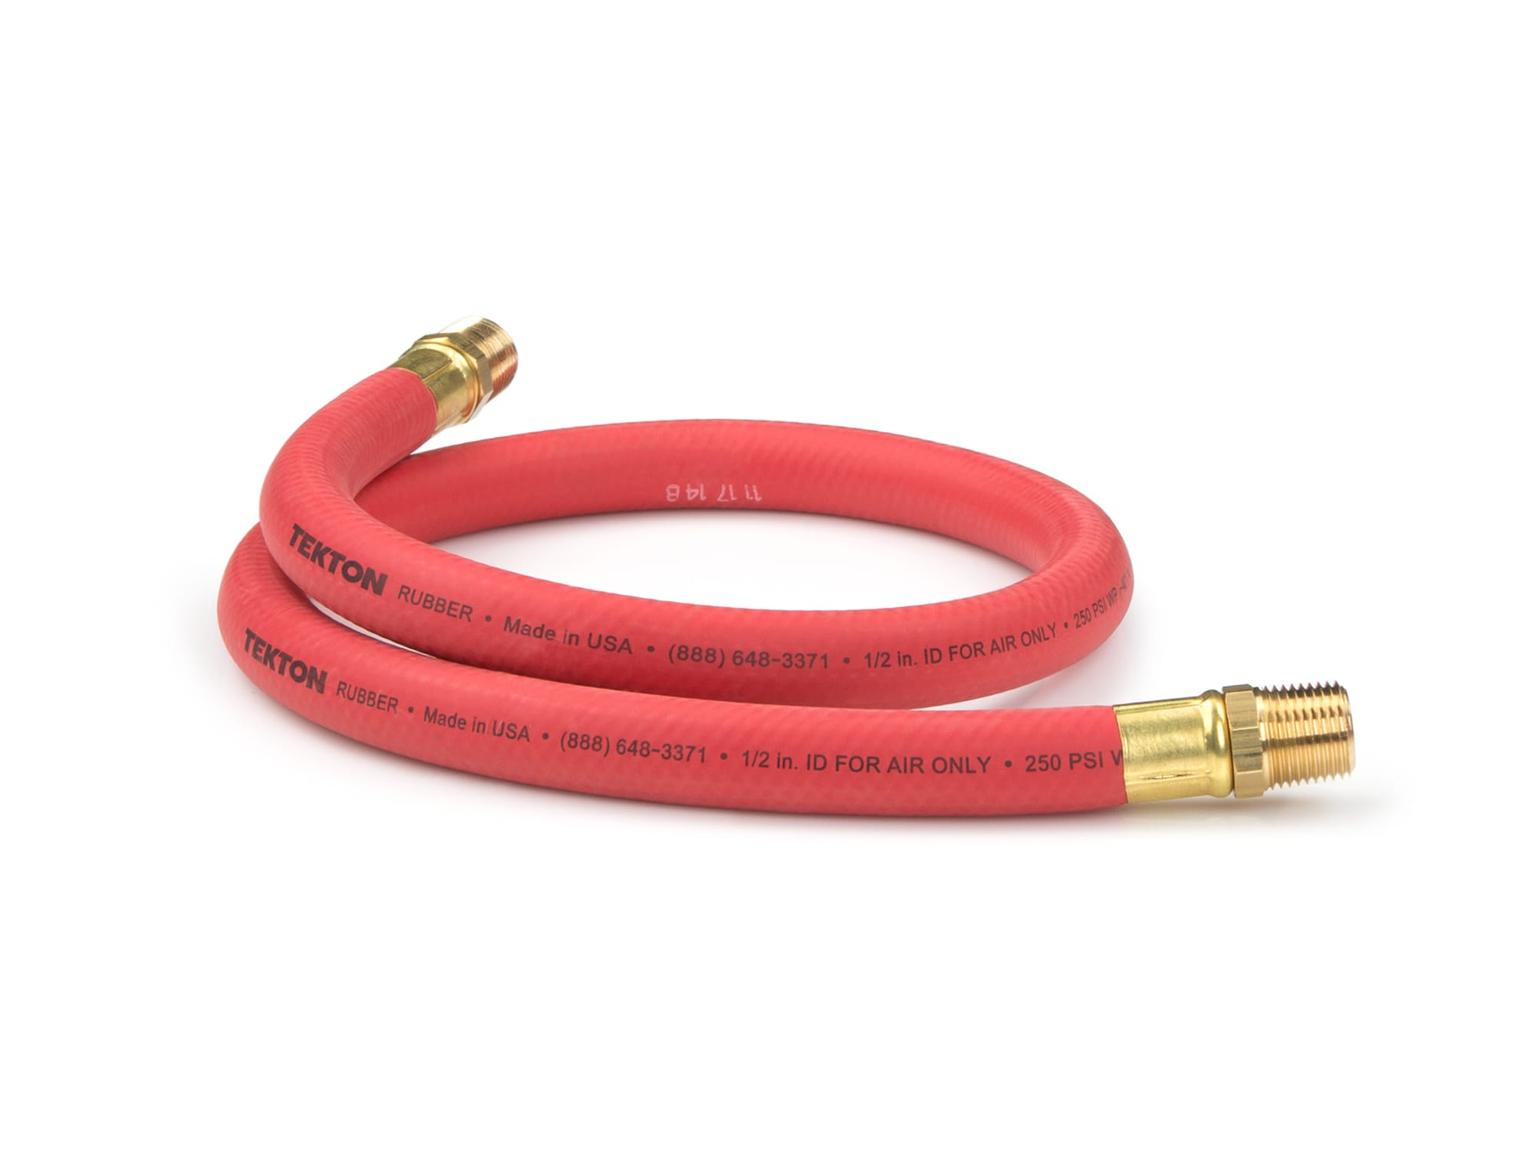 TEKTON 46362-S 1/2 Inch I.D. x 3 Foot Rubber Lead-In Air Hose (250 PSI)